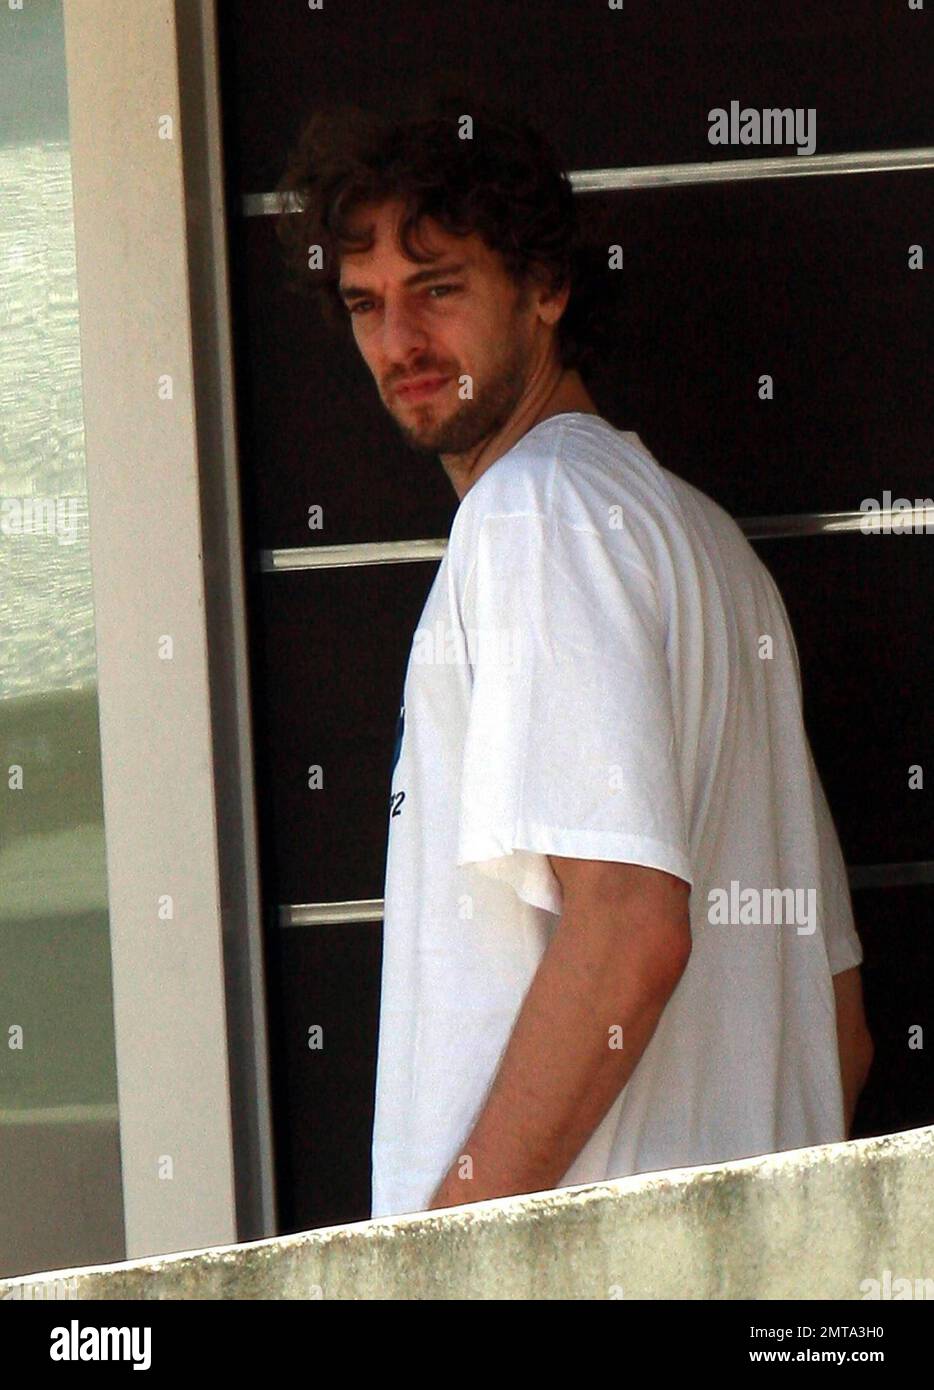 A day after winning the NBA Championship, Lakers center Pau Gasol dresses down and leaves his home to run some errands, carrying along some dress shirts. Redondo Beach, CA. 6/18/10. . Stock Photo